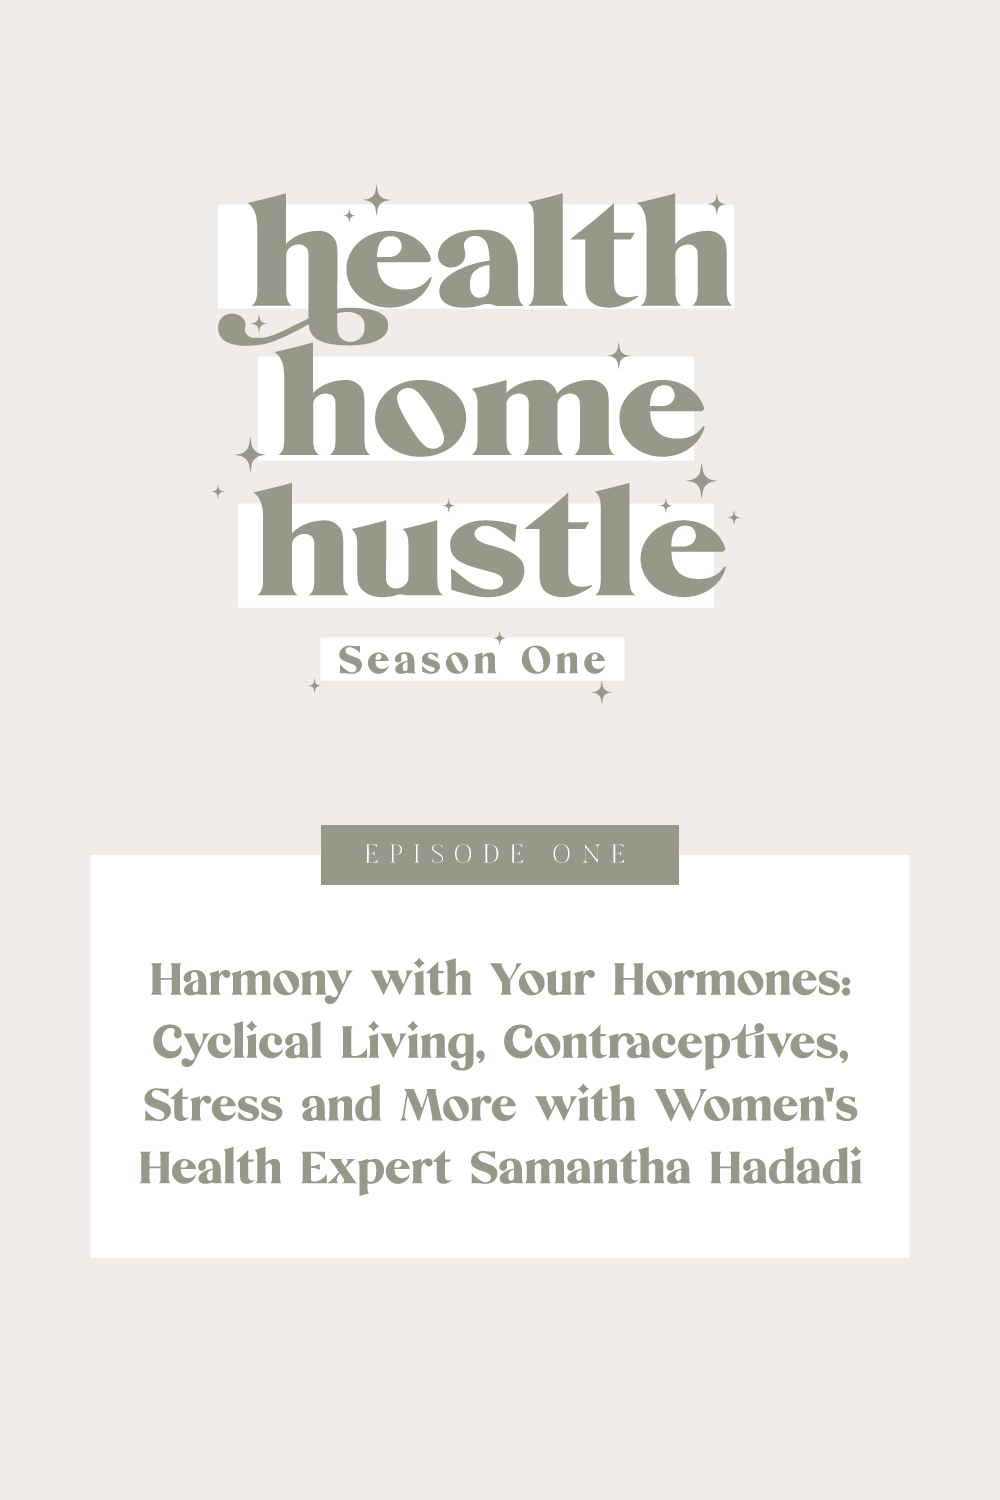 Health Home Hustle Podcast Season 1 Episode 1 with Samantha Hadadi Womens Health and Hormones Podcast